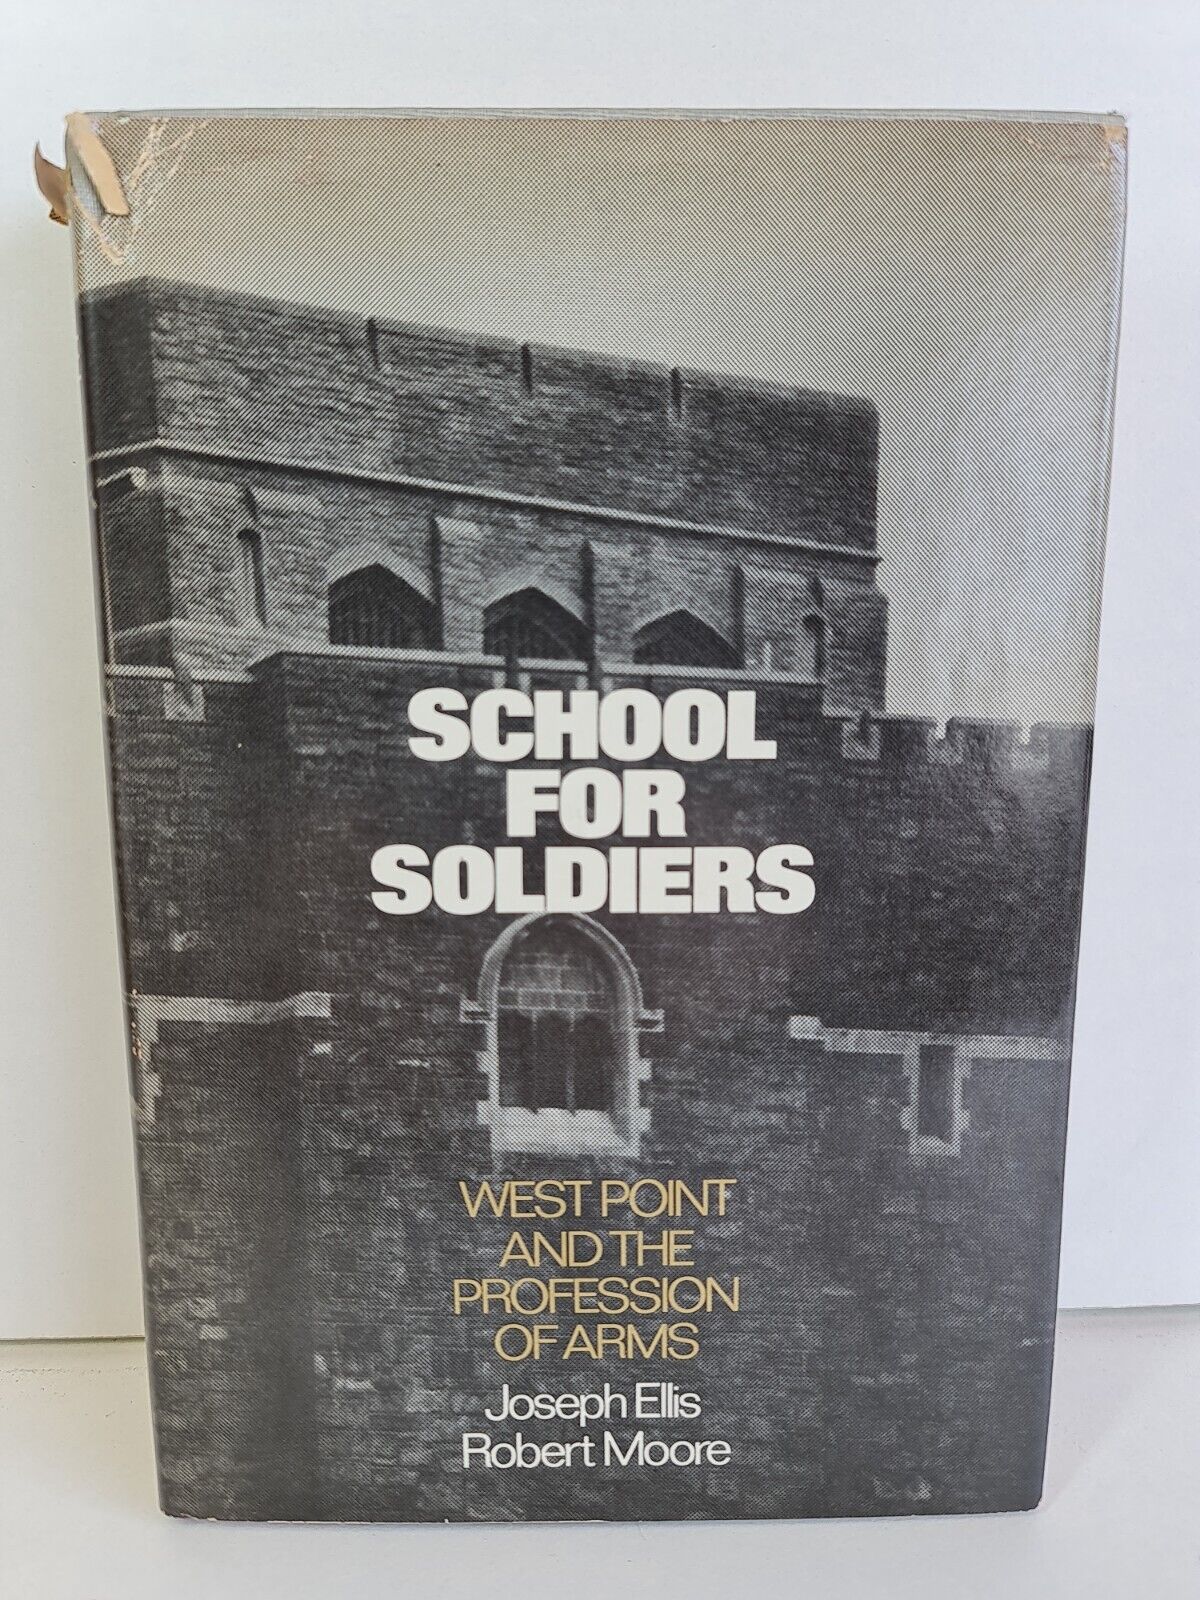 School for Soldiers: West Point & the Profession of Arms by Joseph Ellis